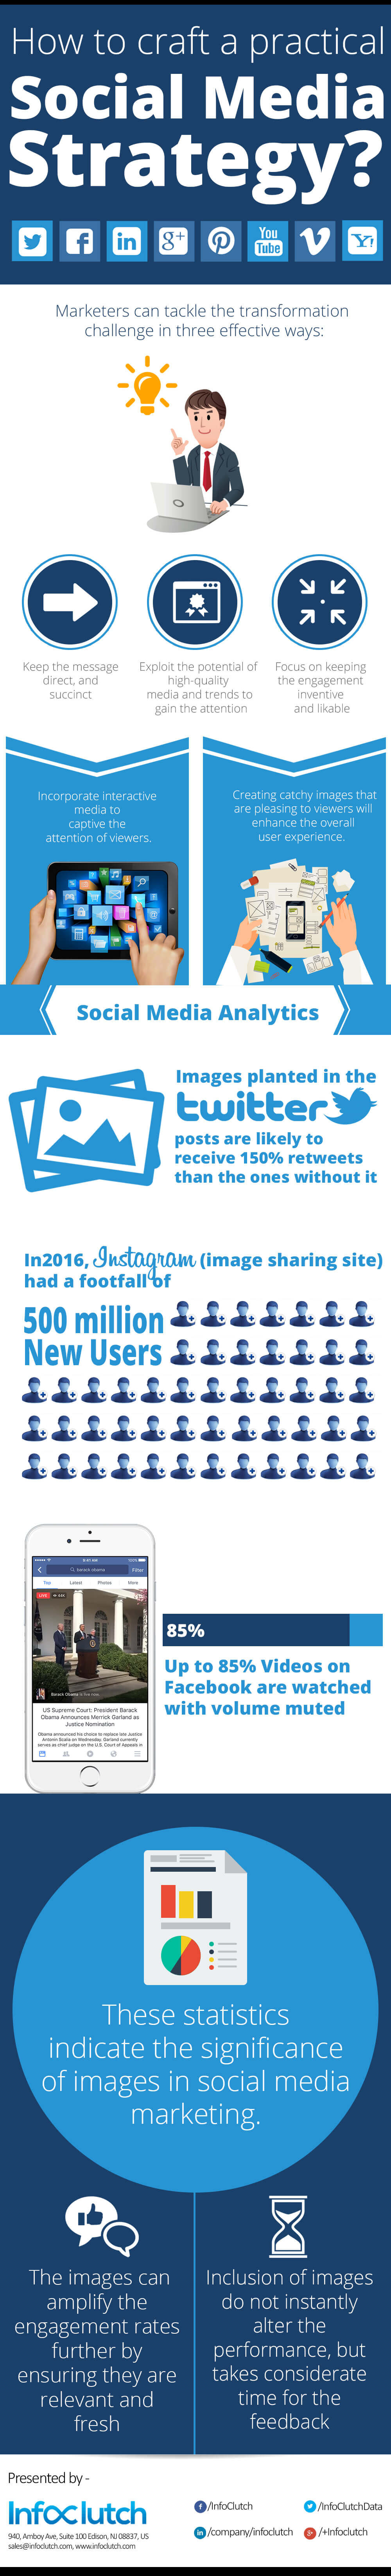 infographic_imag…w-to-craft-a-practical-social-media-strategy-.jpg